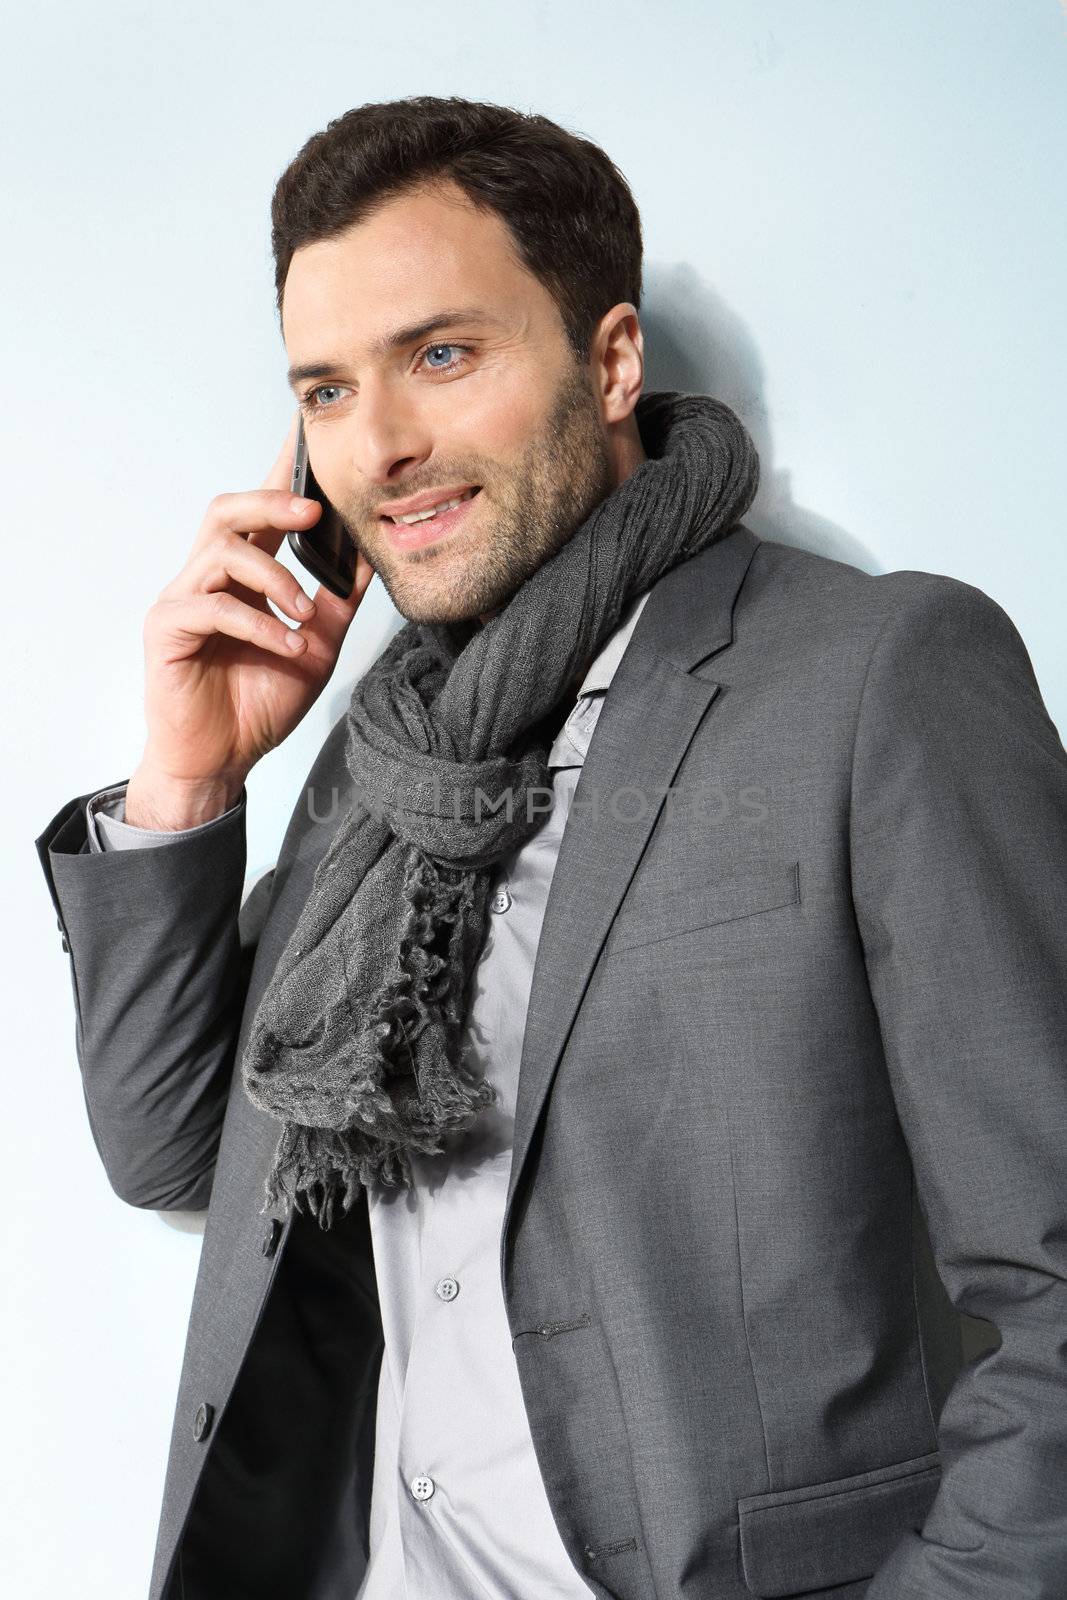 Young businessman using cell phone, over grey background